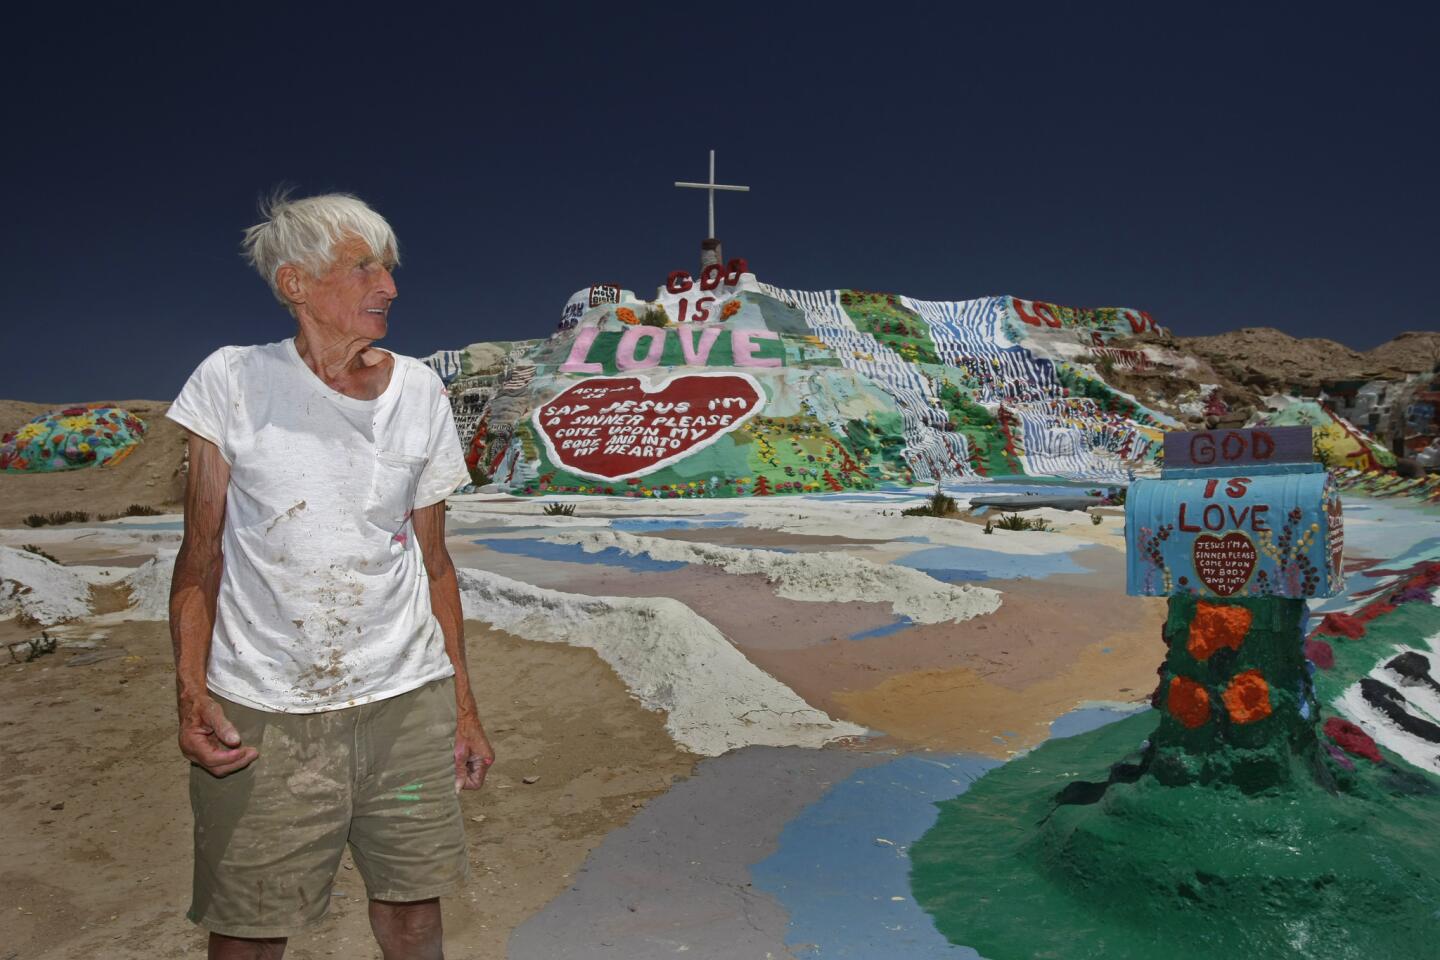 Leonard Knight created Salvation Mountain near the Salton Sea. For decades he slept in his truck, happy to live without lights or running water. "Love Jesus and keep it simple," he said.